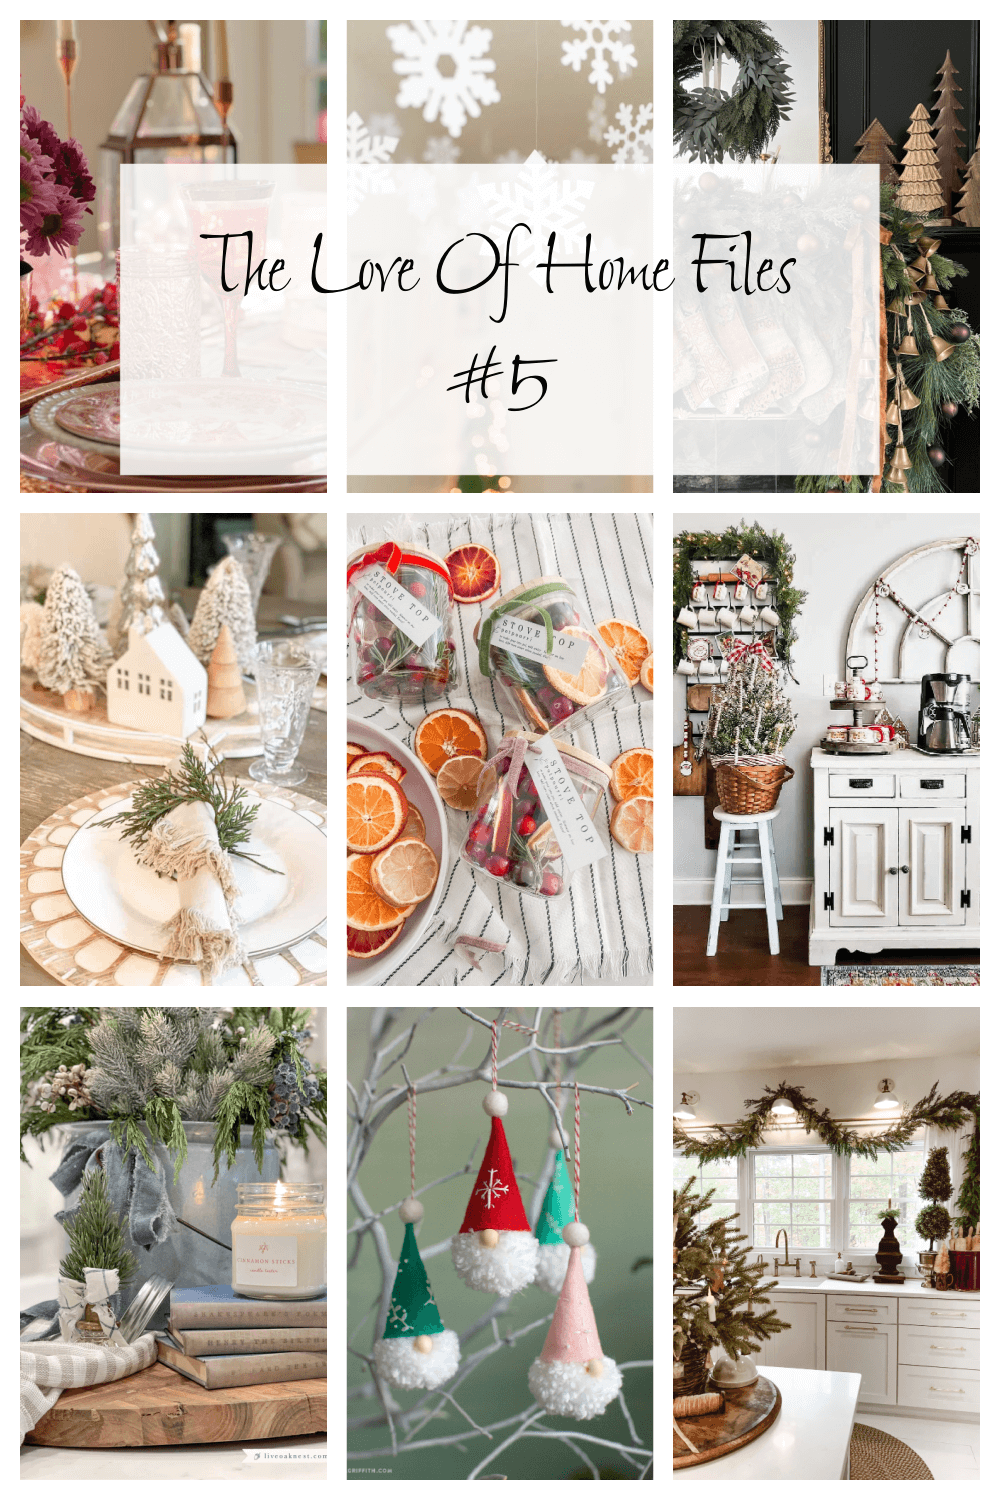 The Love Of Home Files #5